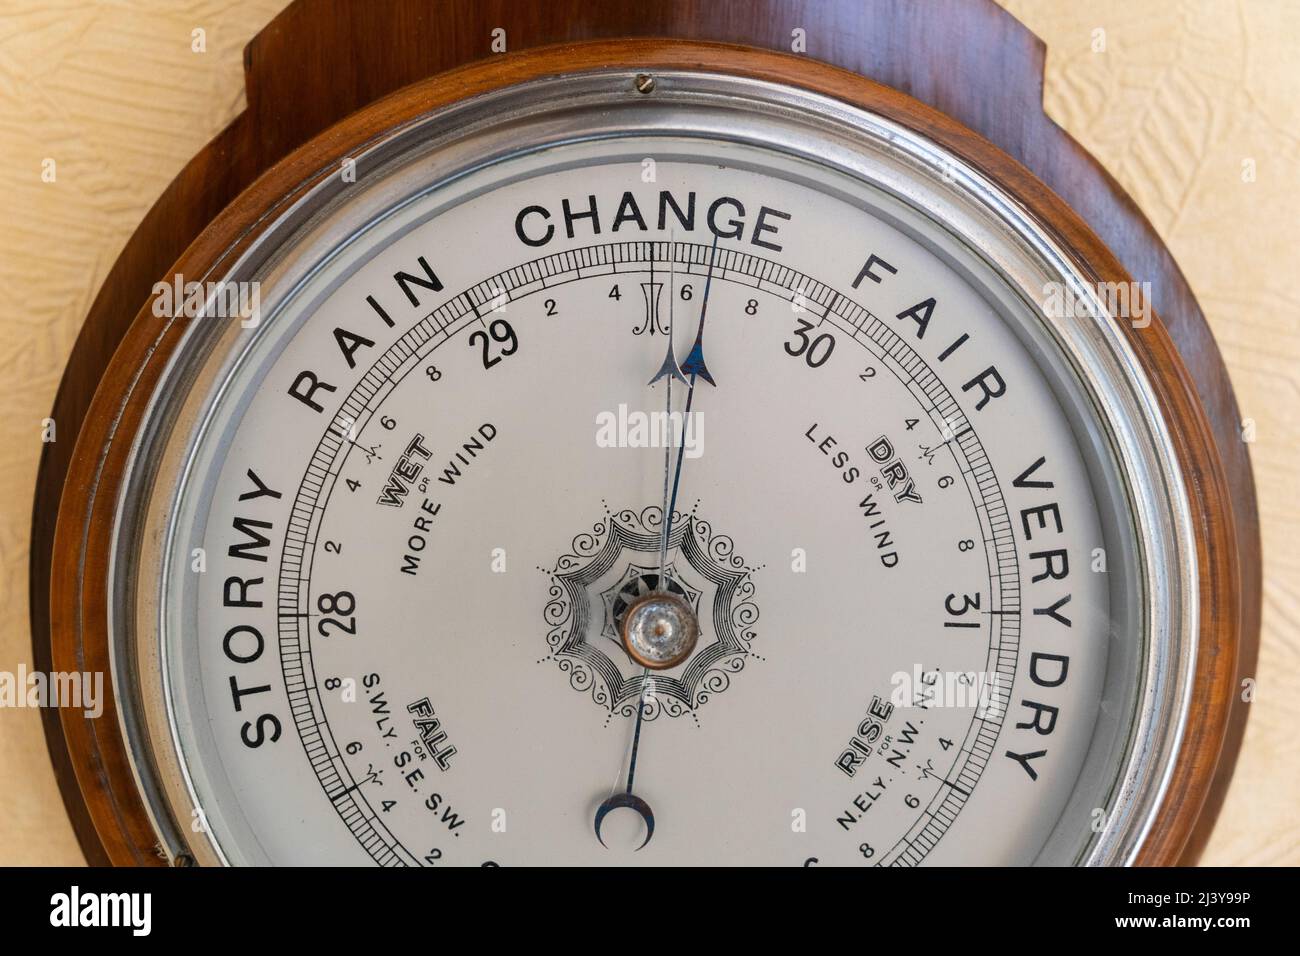 British made antique aneroid barometer with a face showing stormy, rain, change, fair and very dry, currently forecasting a change in the weather. UK Stock Photo